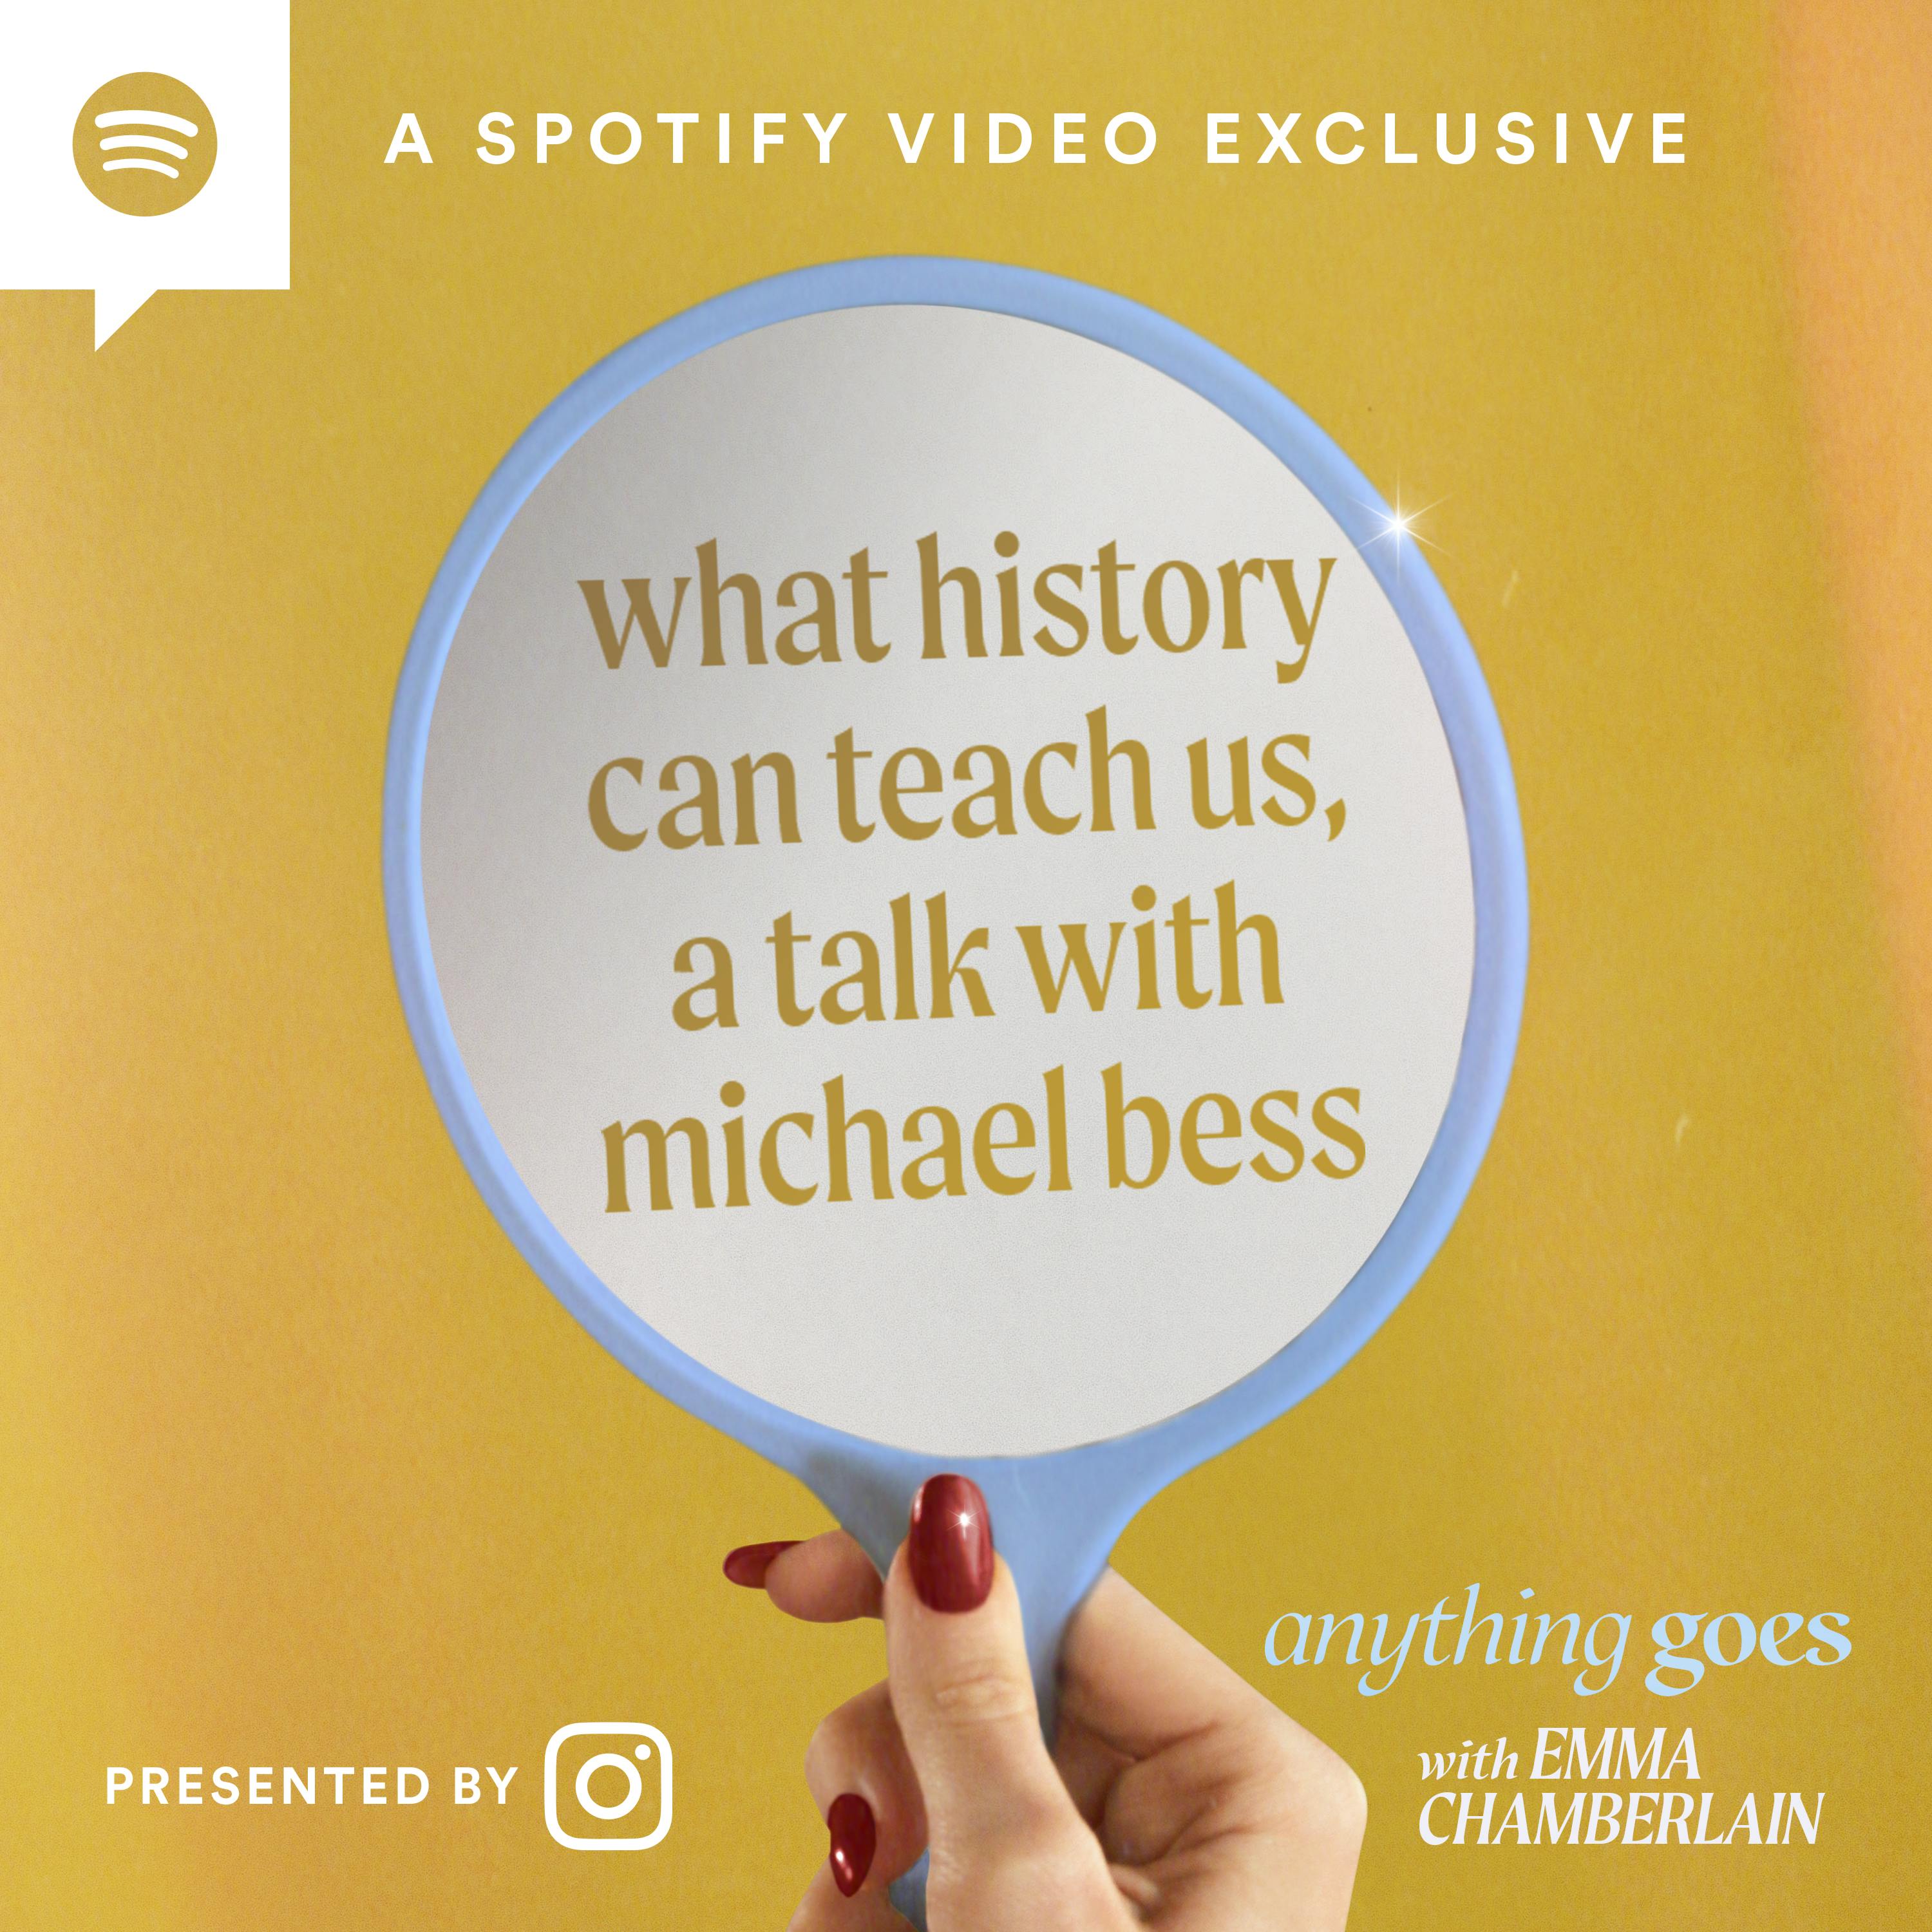 what history can teach us, a talk with michael bess [video]